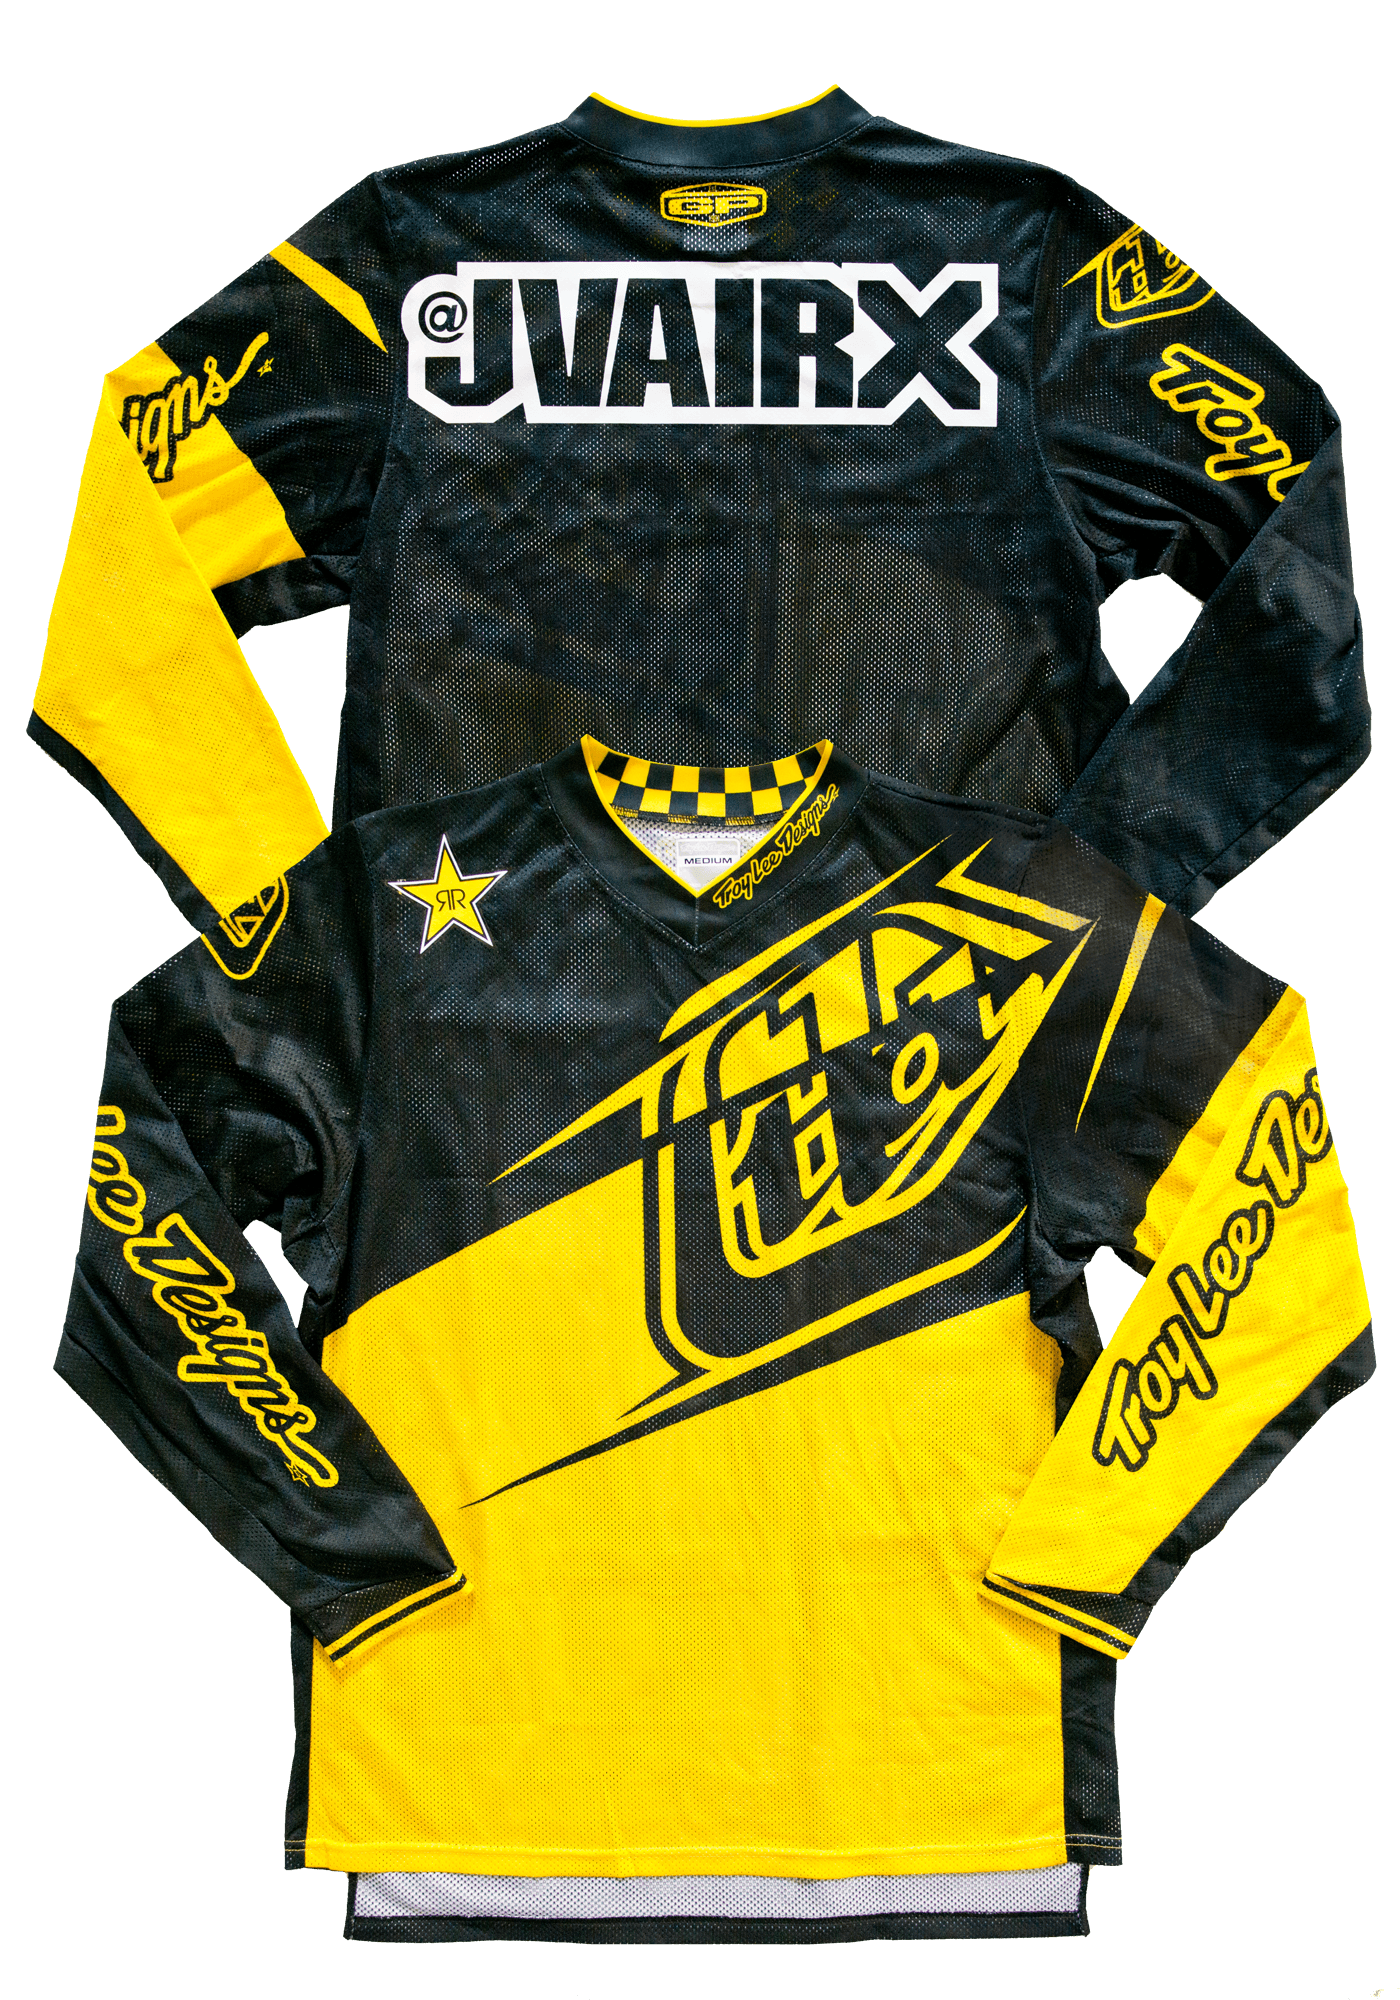 click here to view a large image of Javier Villegass Gear